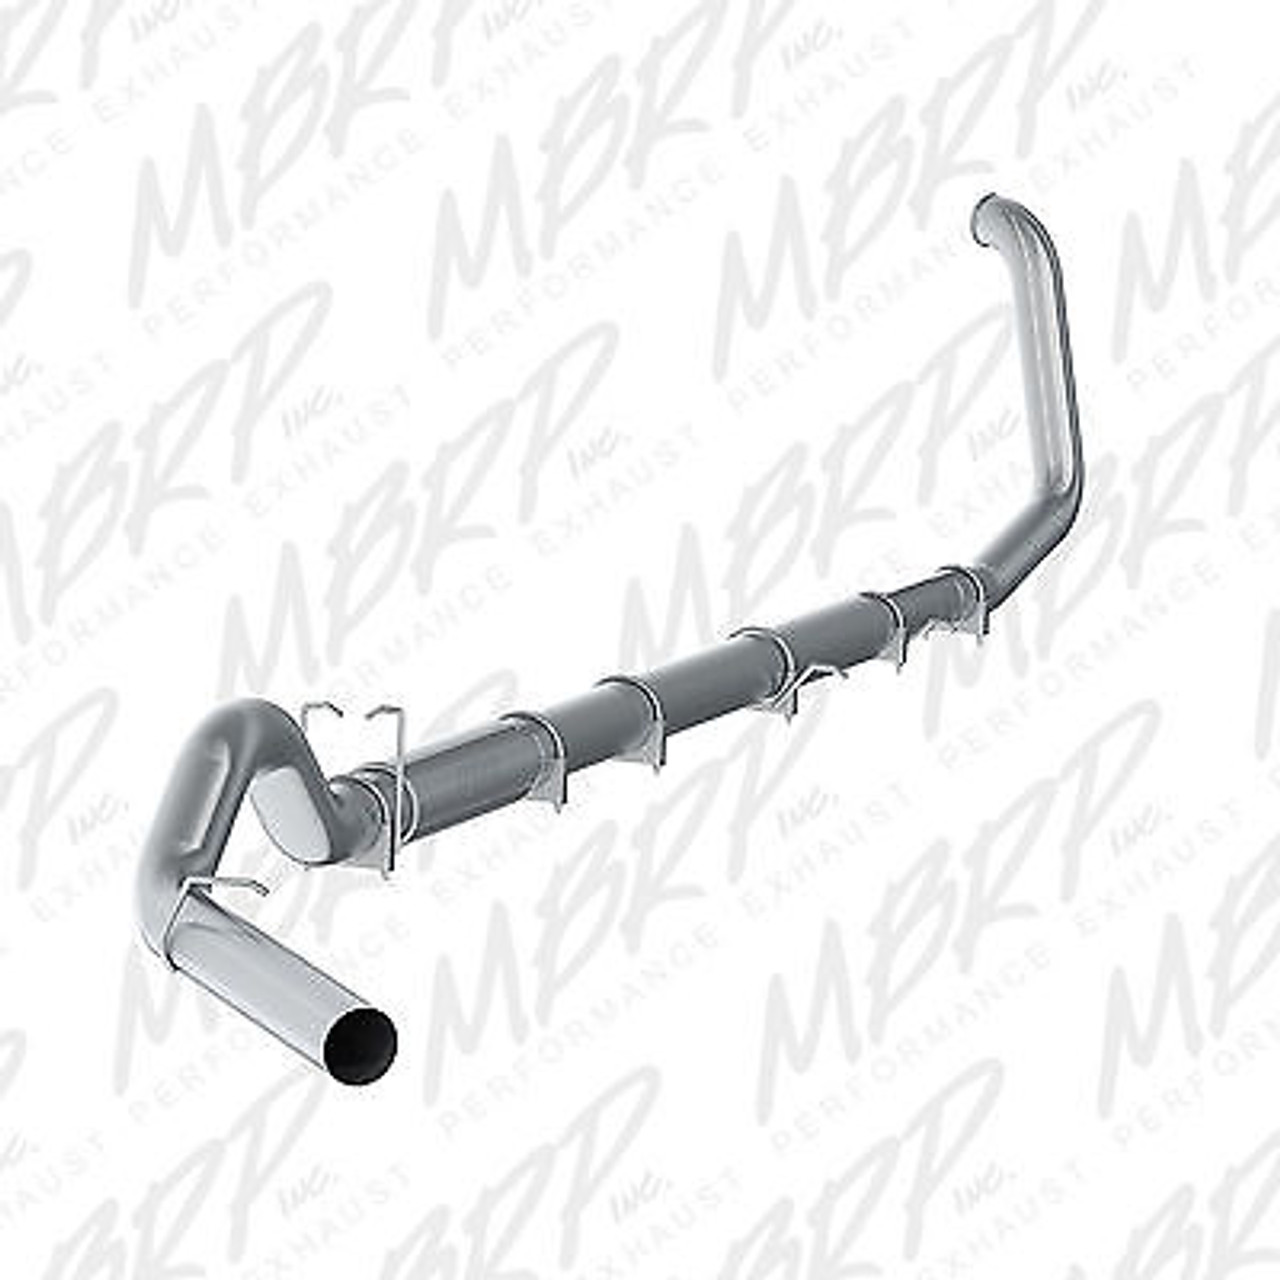 S62220P - MBRP 5" TURBO BACK PERFORMANCE EXHAUST 99-03 FORD POWERSTROKE 7.3L TURBO DIESEL